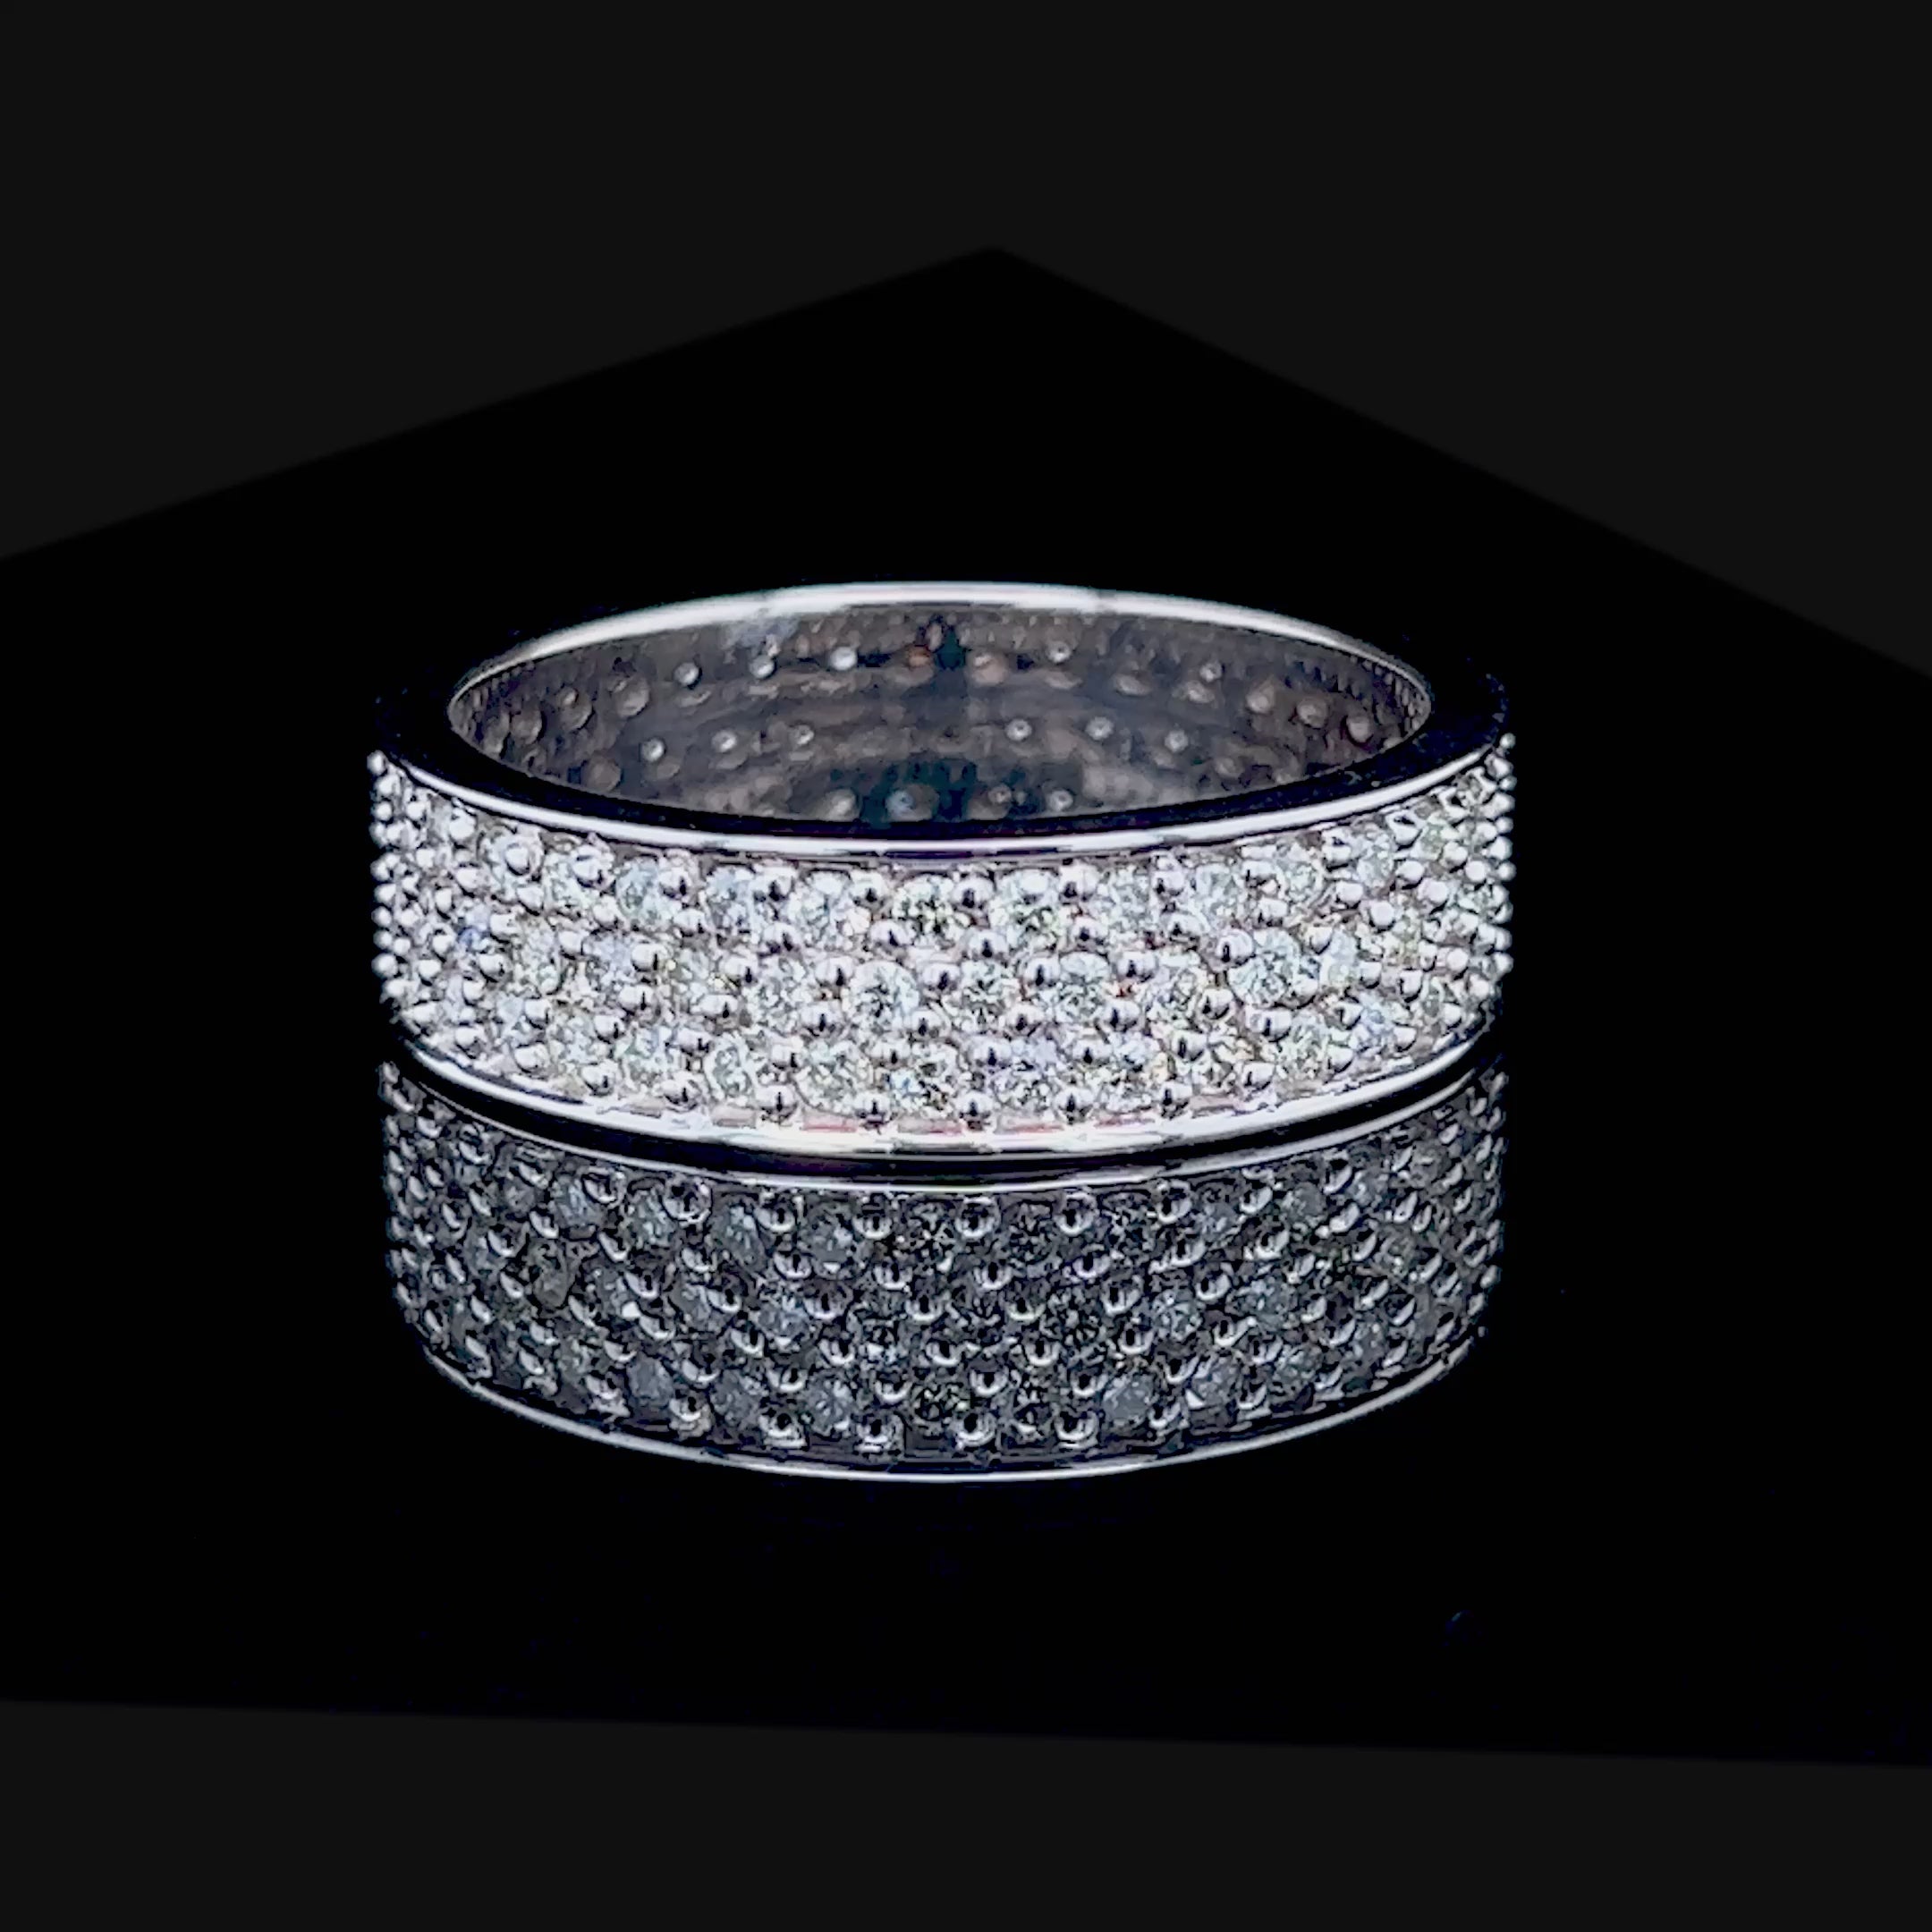 Gorgeous 2.20 CT Round Cut Diamond Eternity Ring in 14KT White Gold